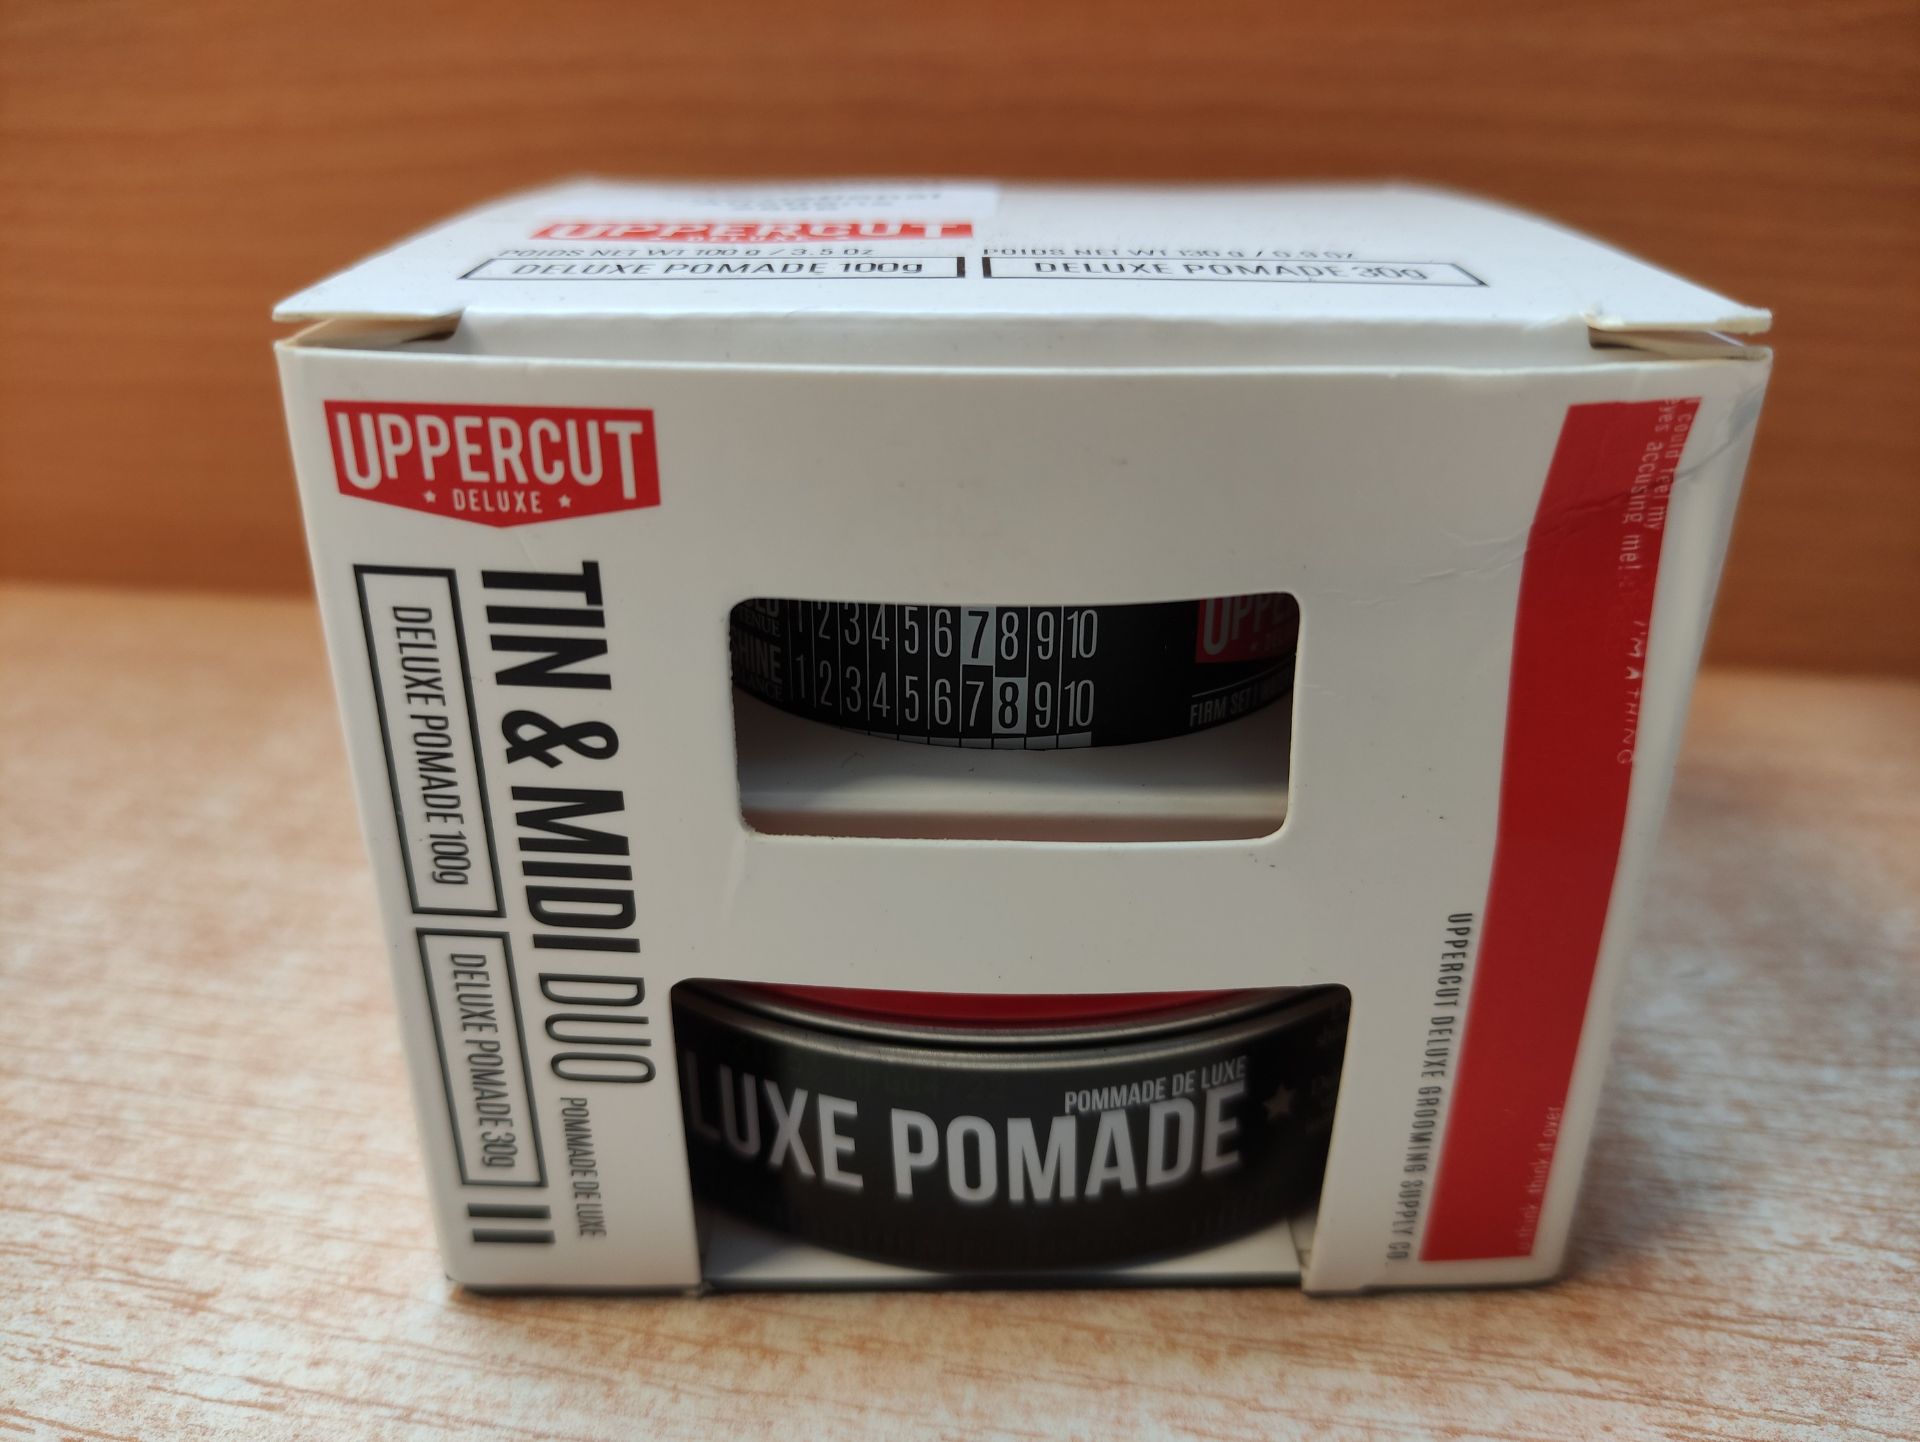 RRP £19.13 Uppercut Deluxe Pomade 1 x 100g and Deluxe Pomade Midi Duo 1 x 30g, Gift Set - Image 2 of 2